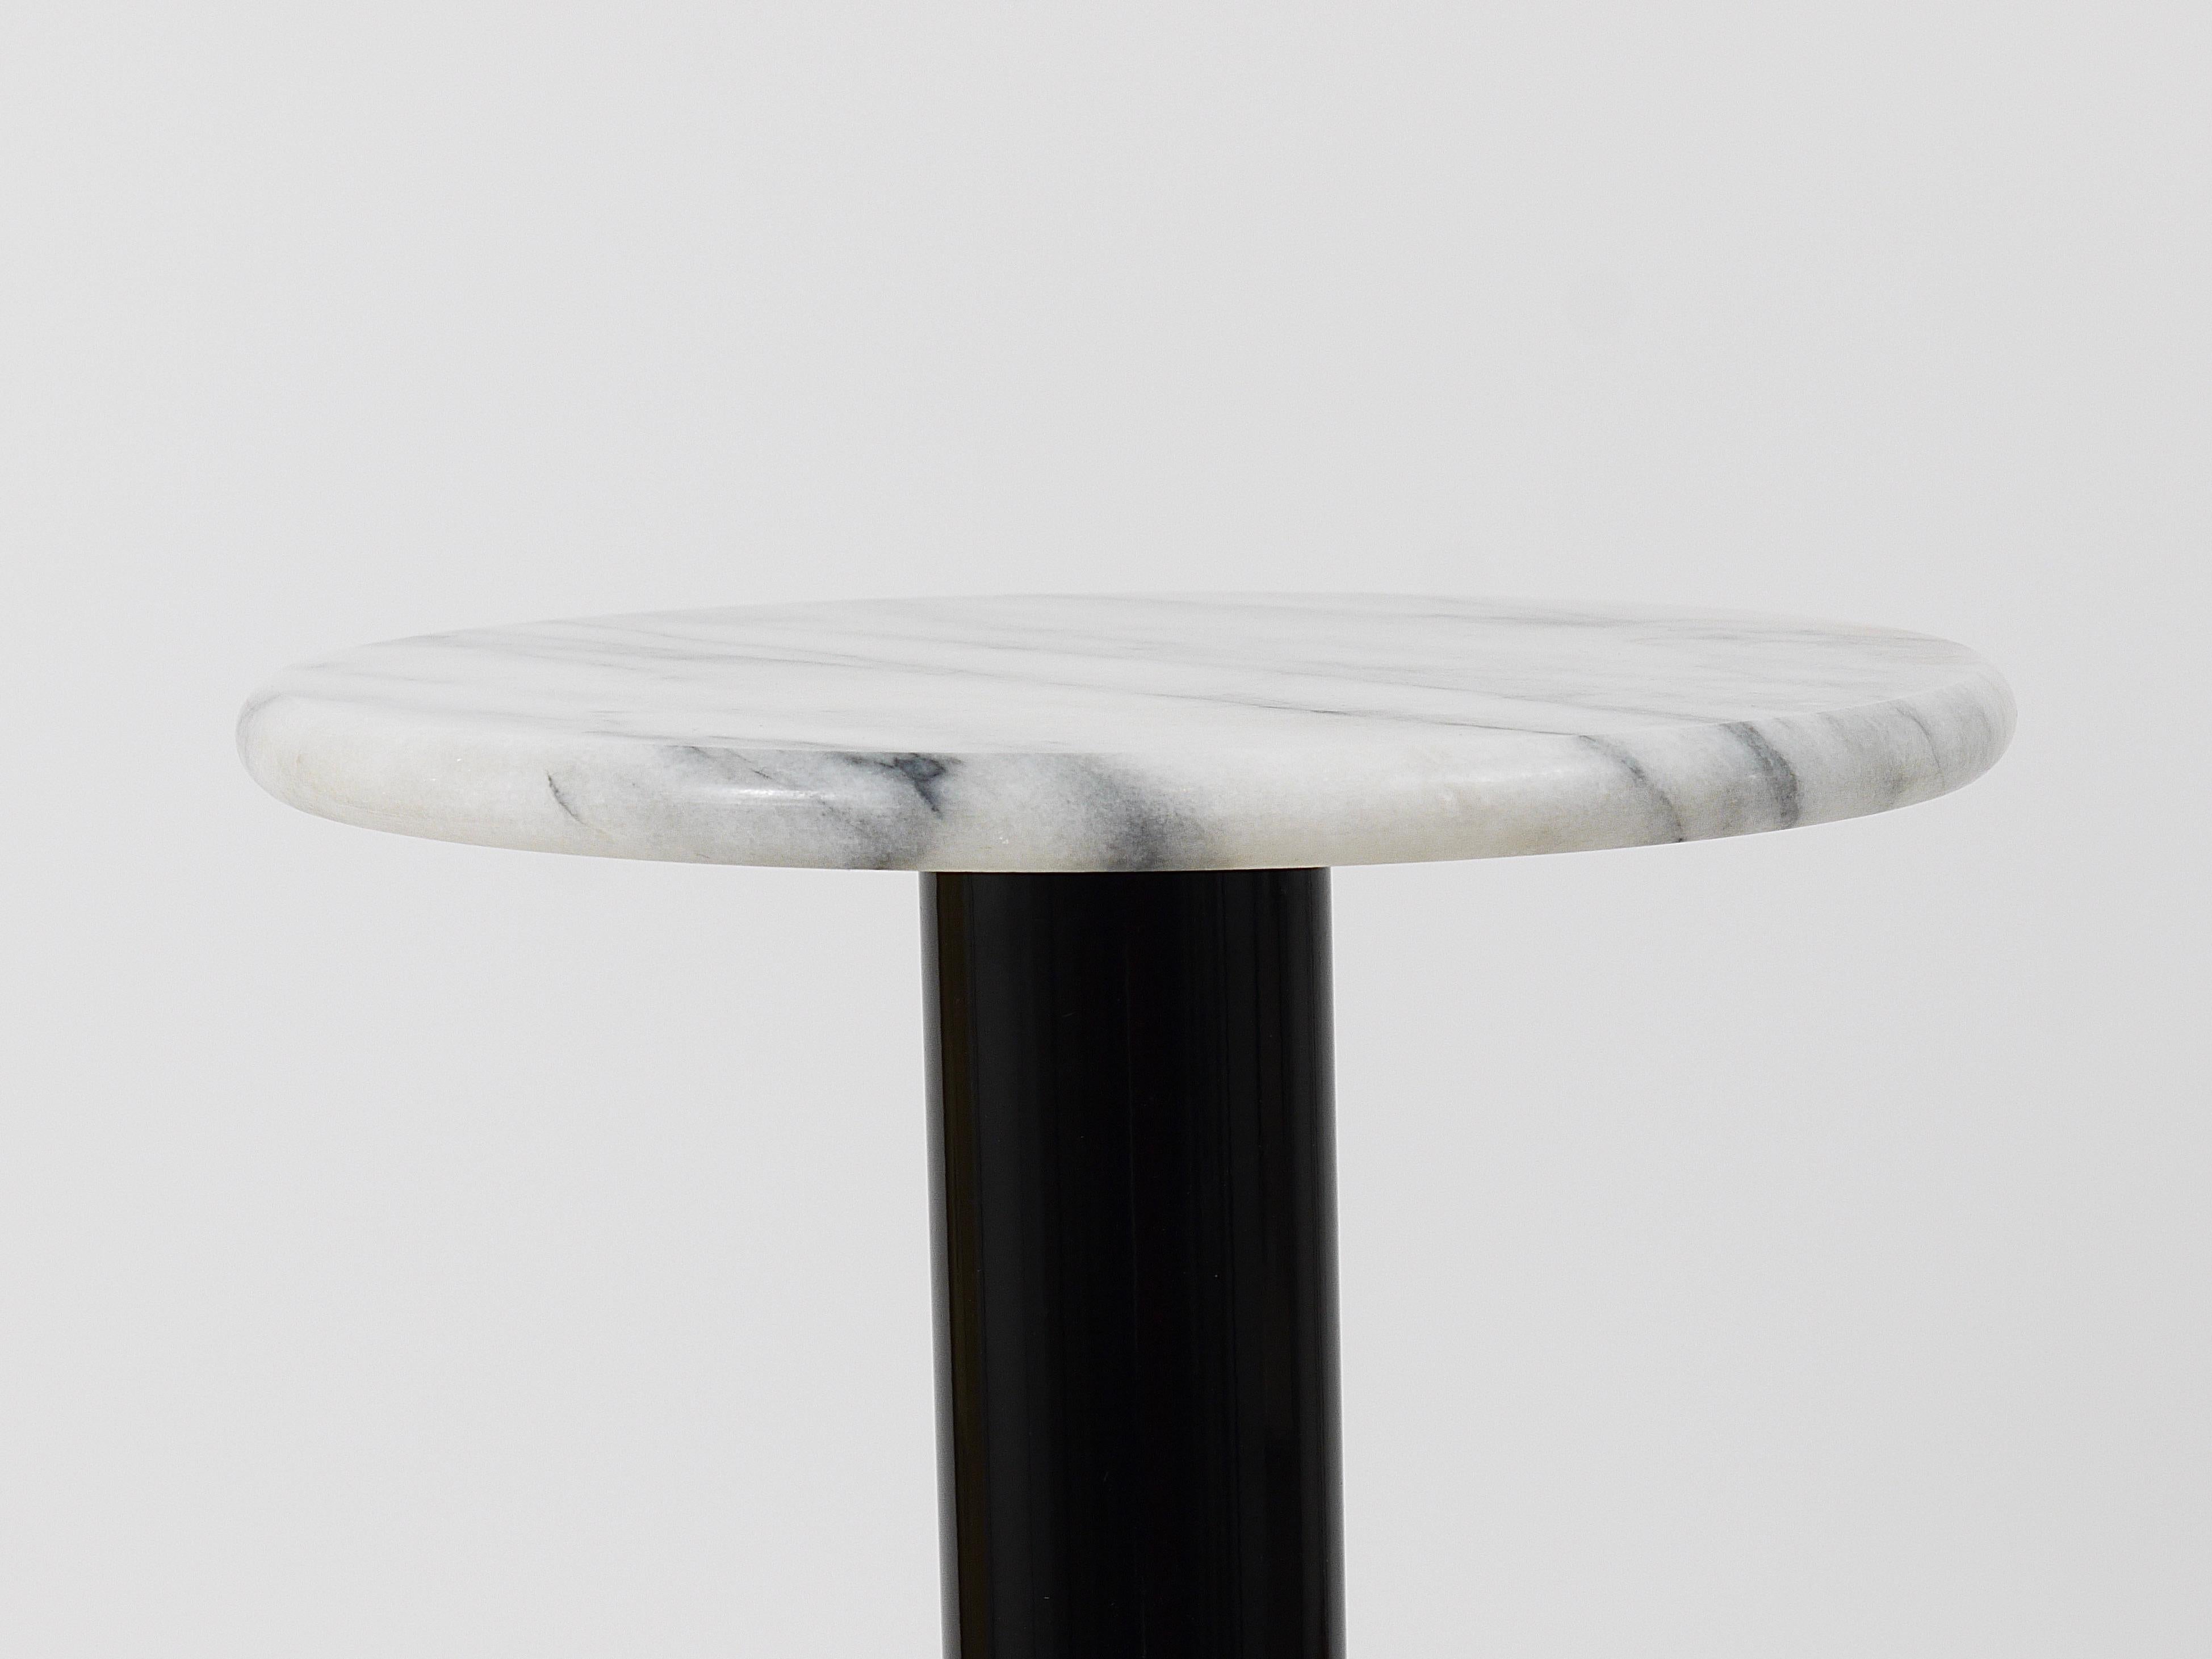 Postmodern White Carrara Marble Flower Stand Pedestal Table, Italy, 1980s For Sale 5